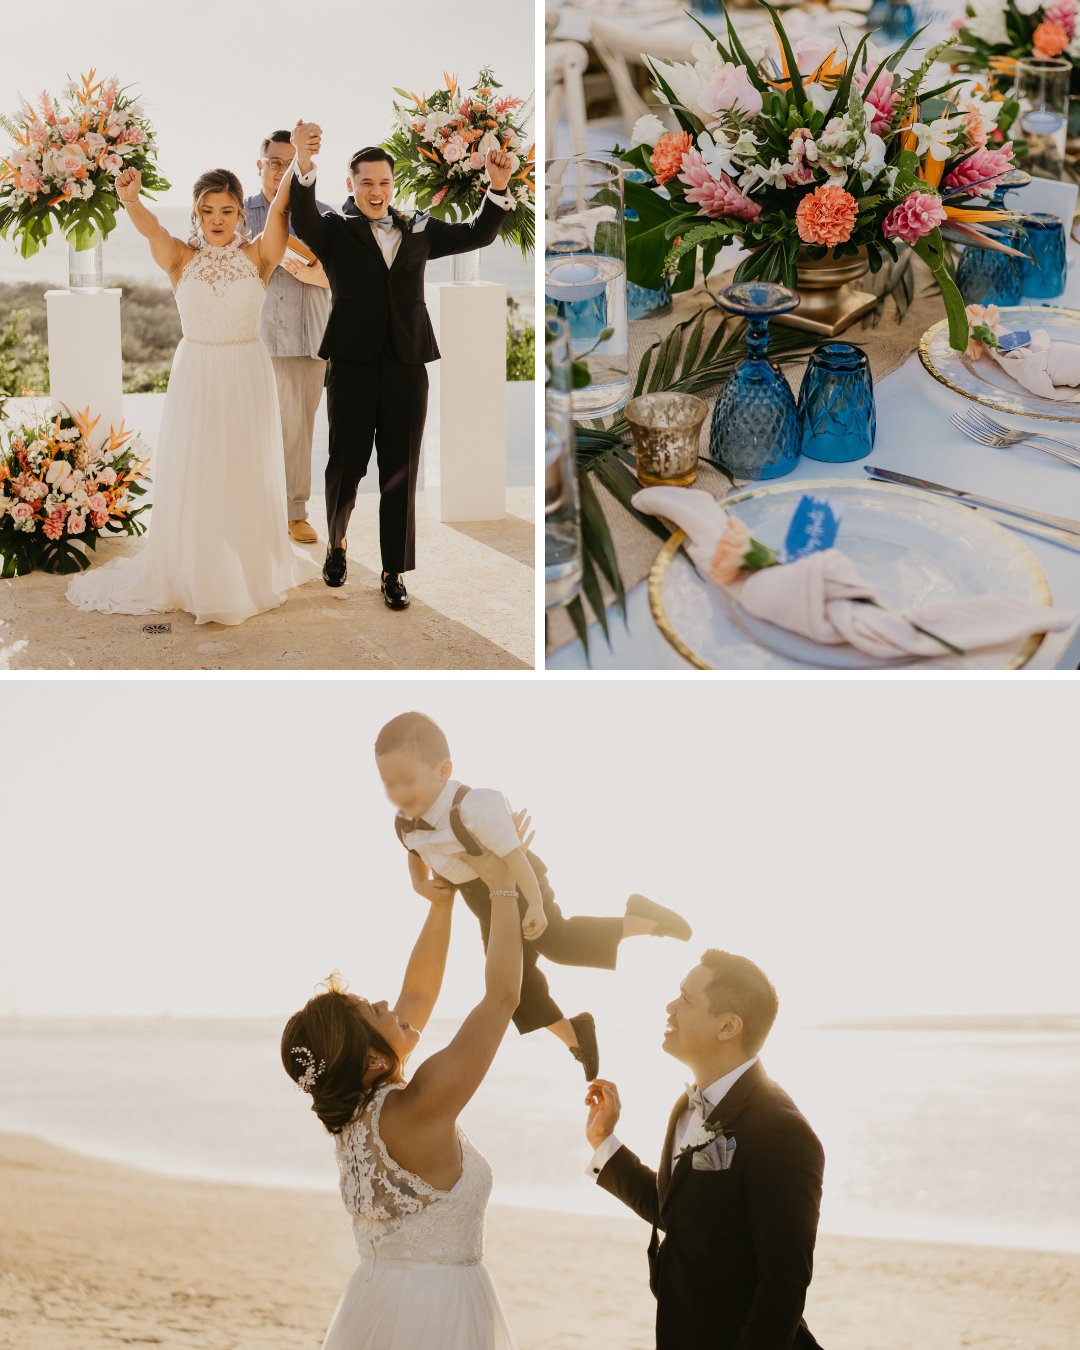 A three-part collage captures a beach wedding. The top image shows the couple celebrating with raised hands at the altar. The middle image displays a colorful, elegant table setting with floral arrangements. The bottom image portrays the couple playing with a young child by the water.